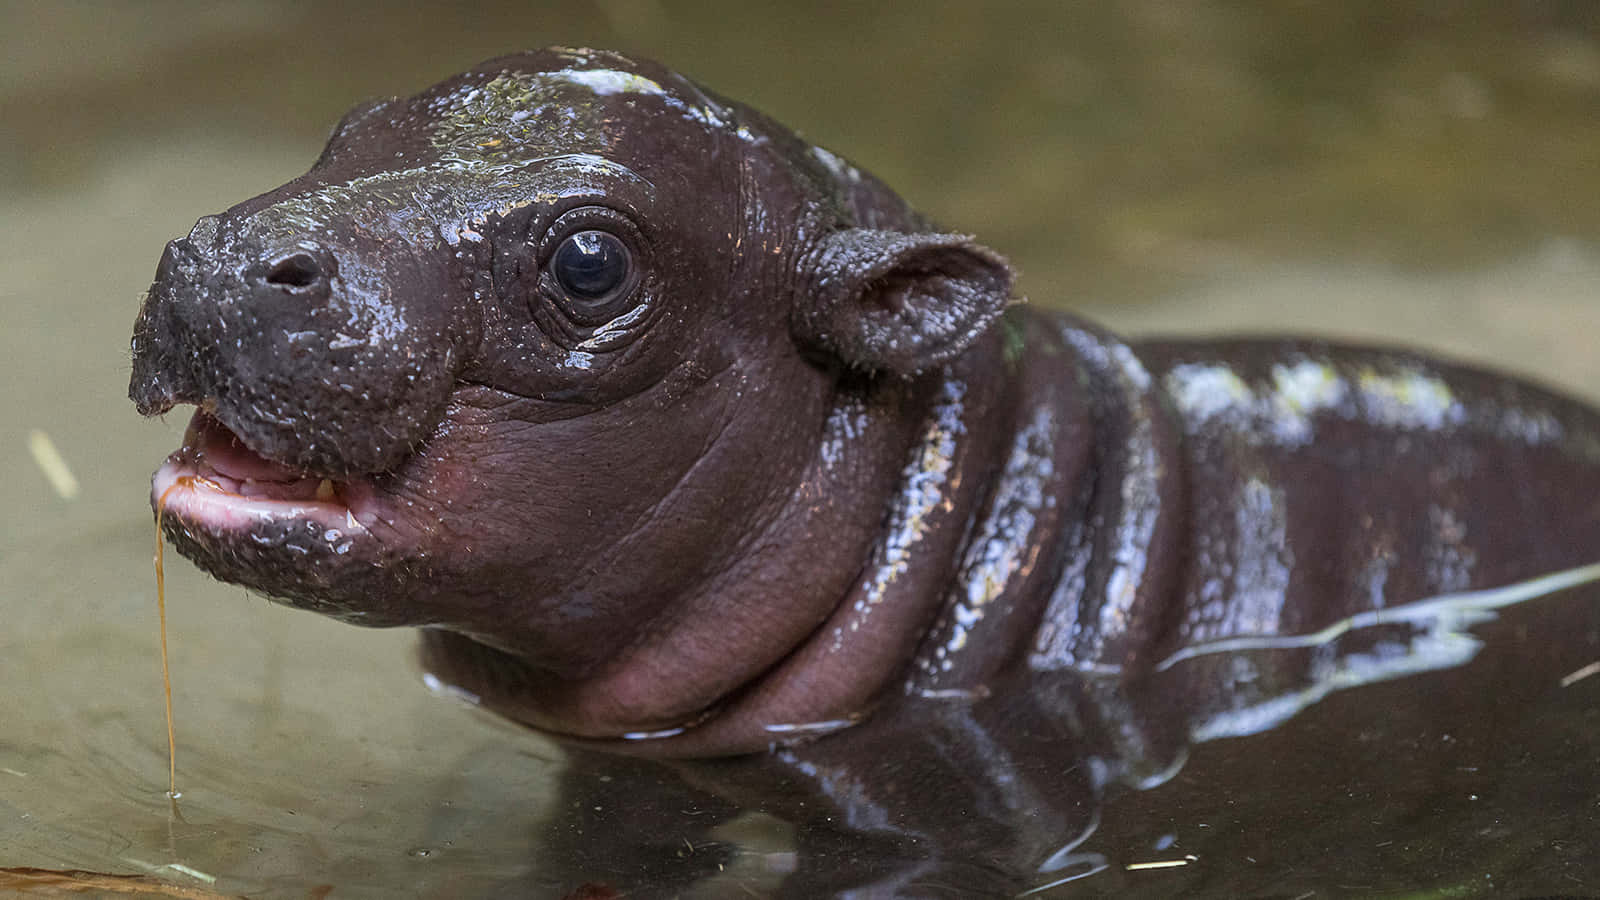 “An Adorable Baby Hippo Enjoys a Splash in the Water”